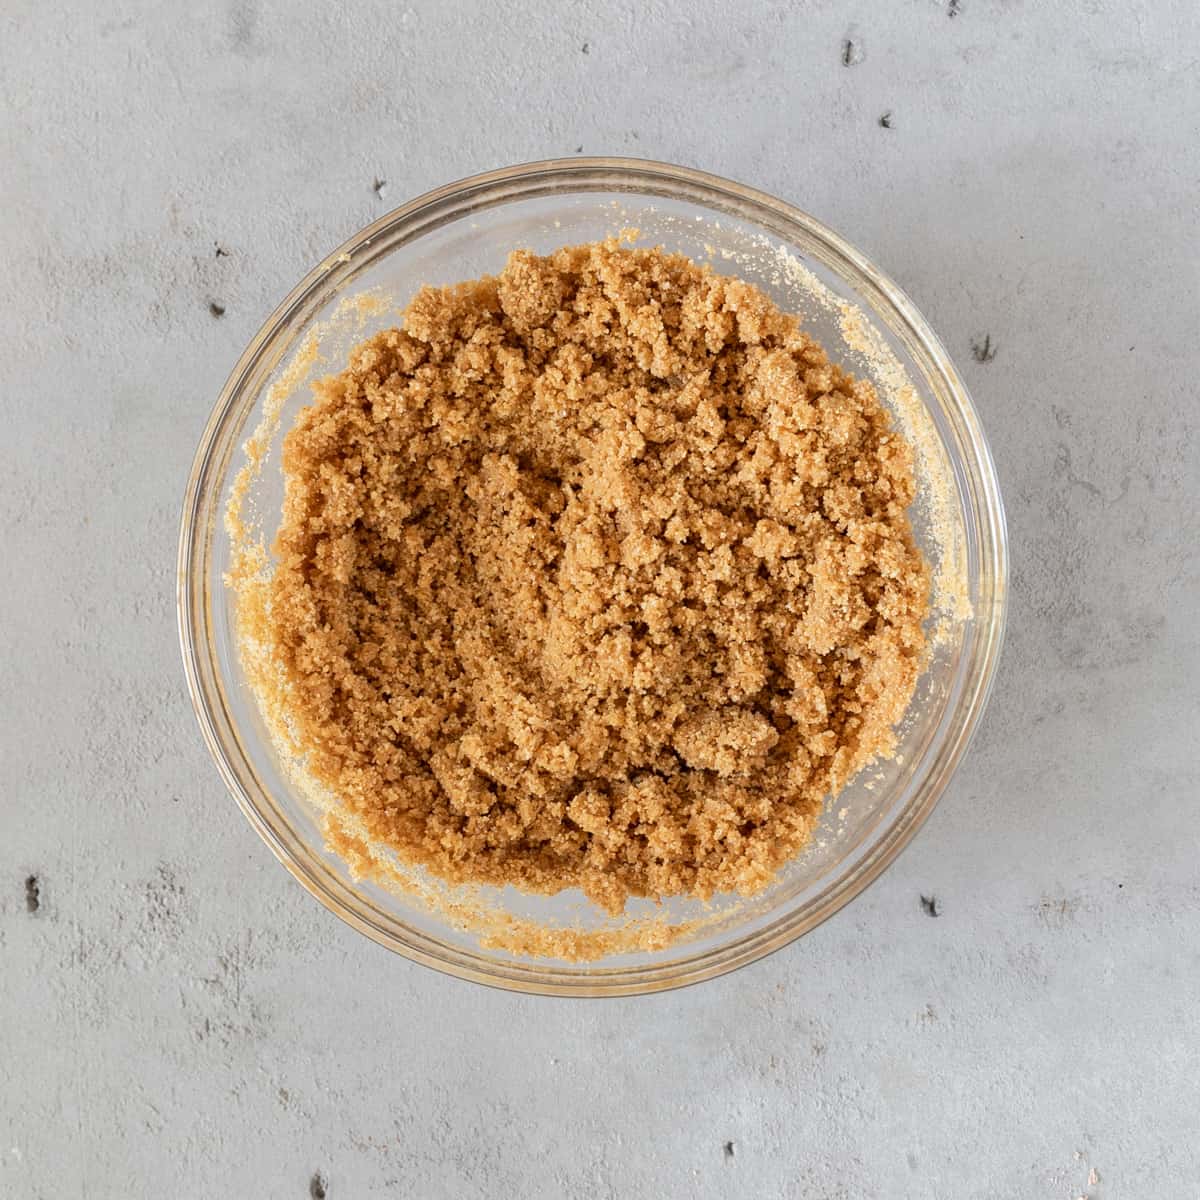 the graham cracker crust mixture in a glass bowl on a grey background.